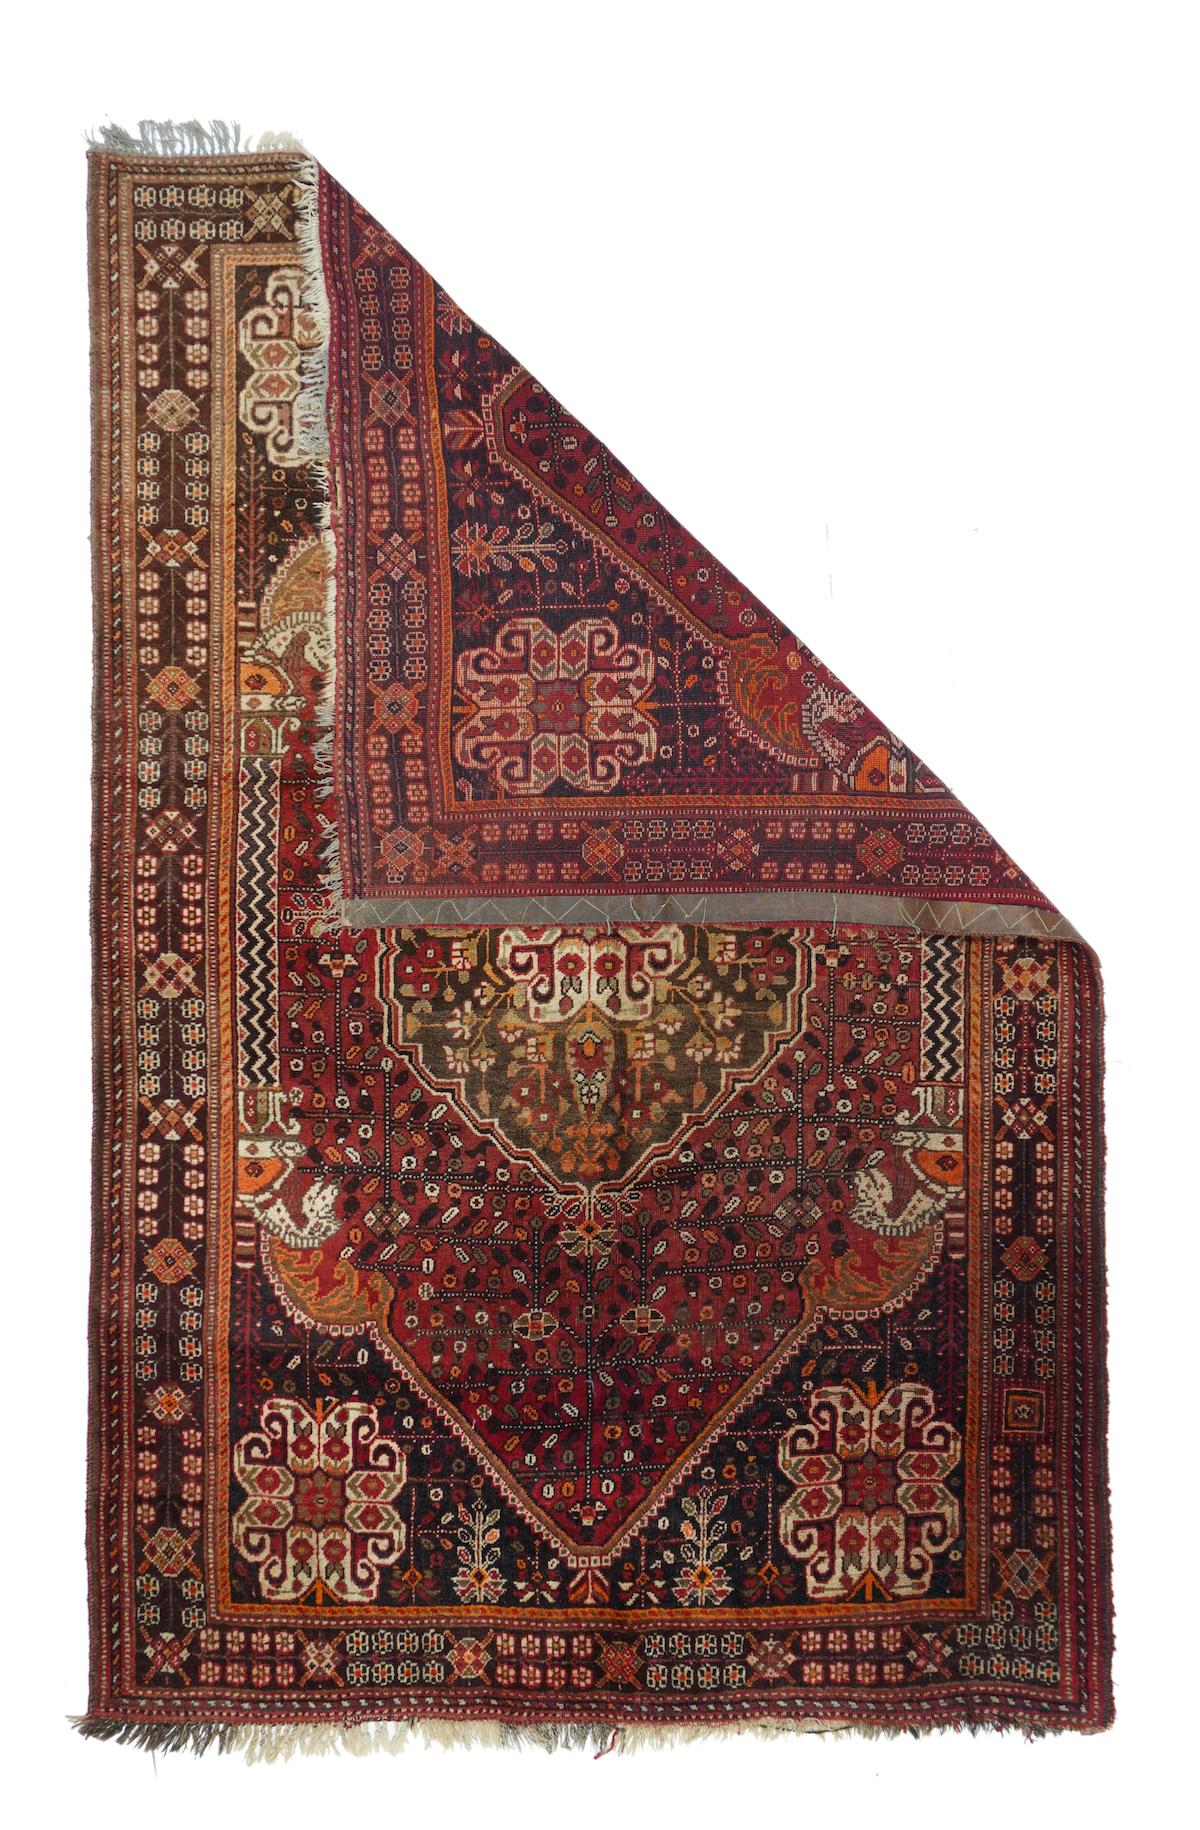 Vintage Qashqai rug, measures :5'4'' x 8'4''. Iconic vintage SW Persian tribal scatter with horse headed side zig-zag patterned colonettes a la Persepolis, corner and central ecru eight boteh 